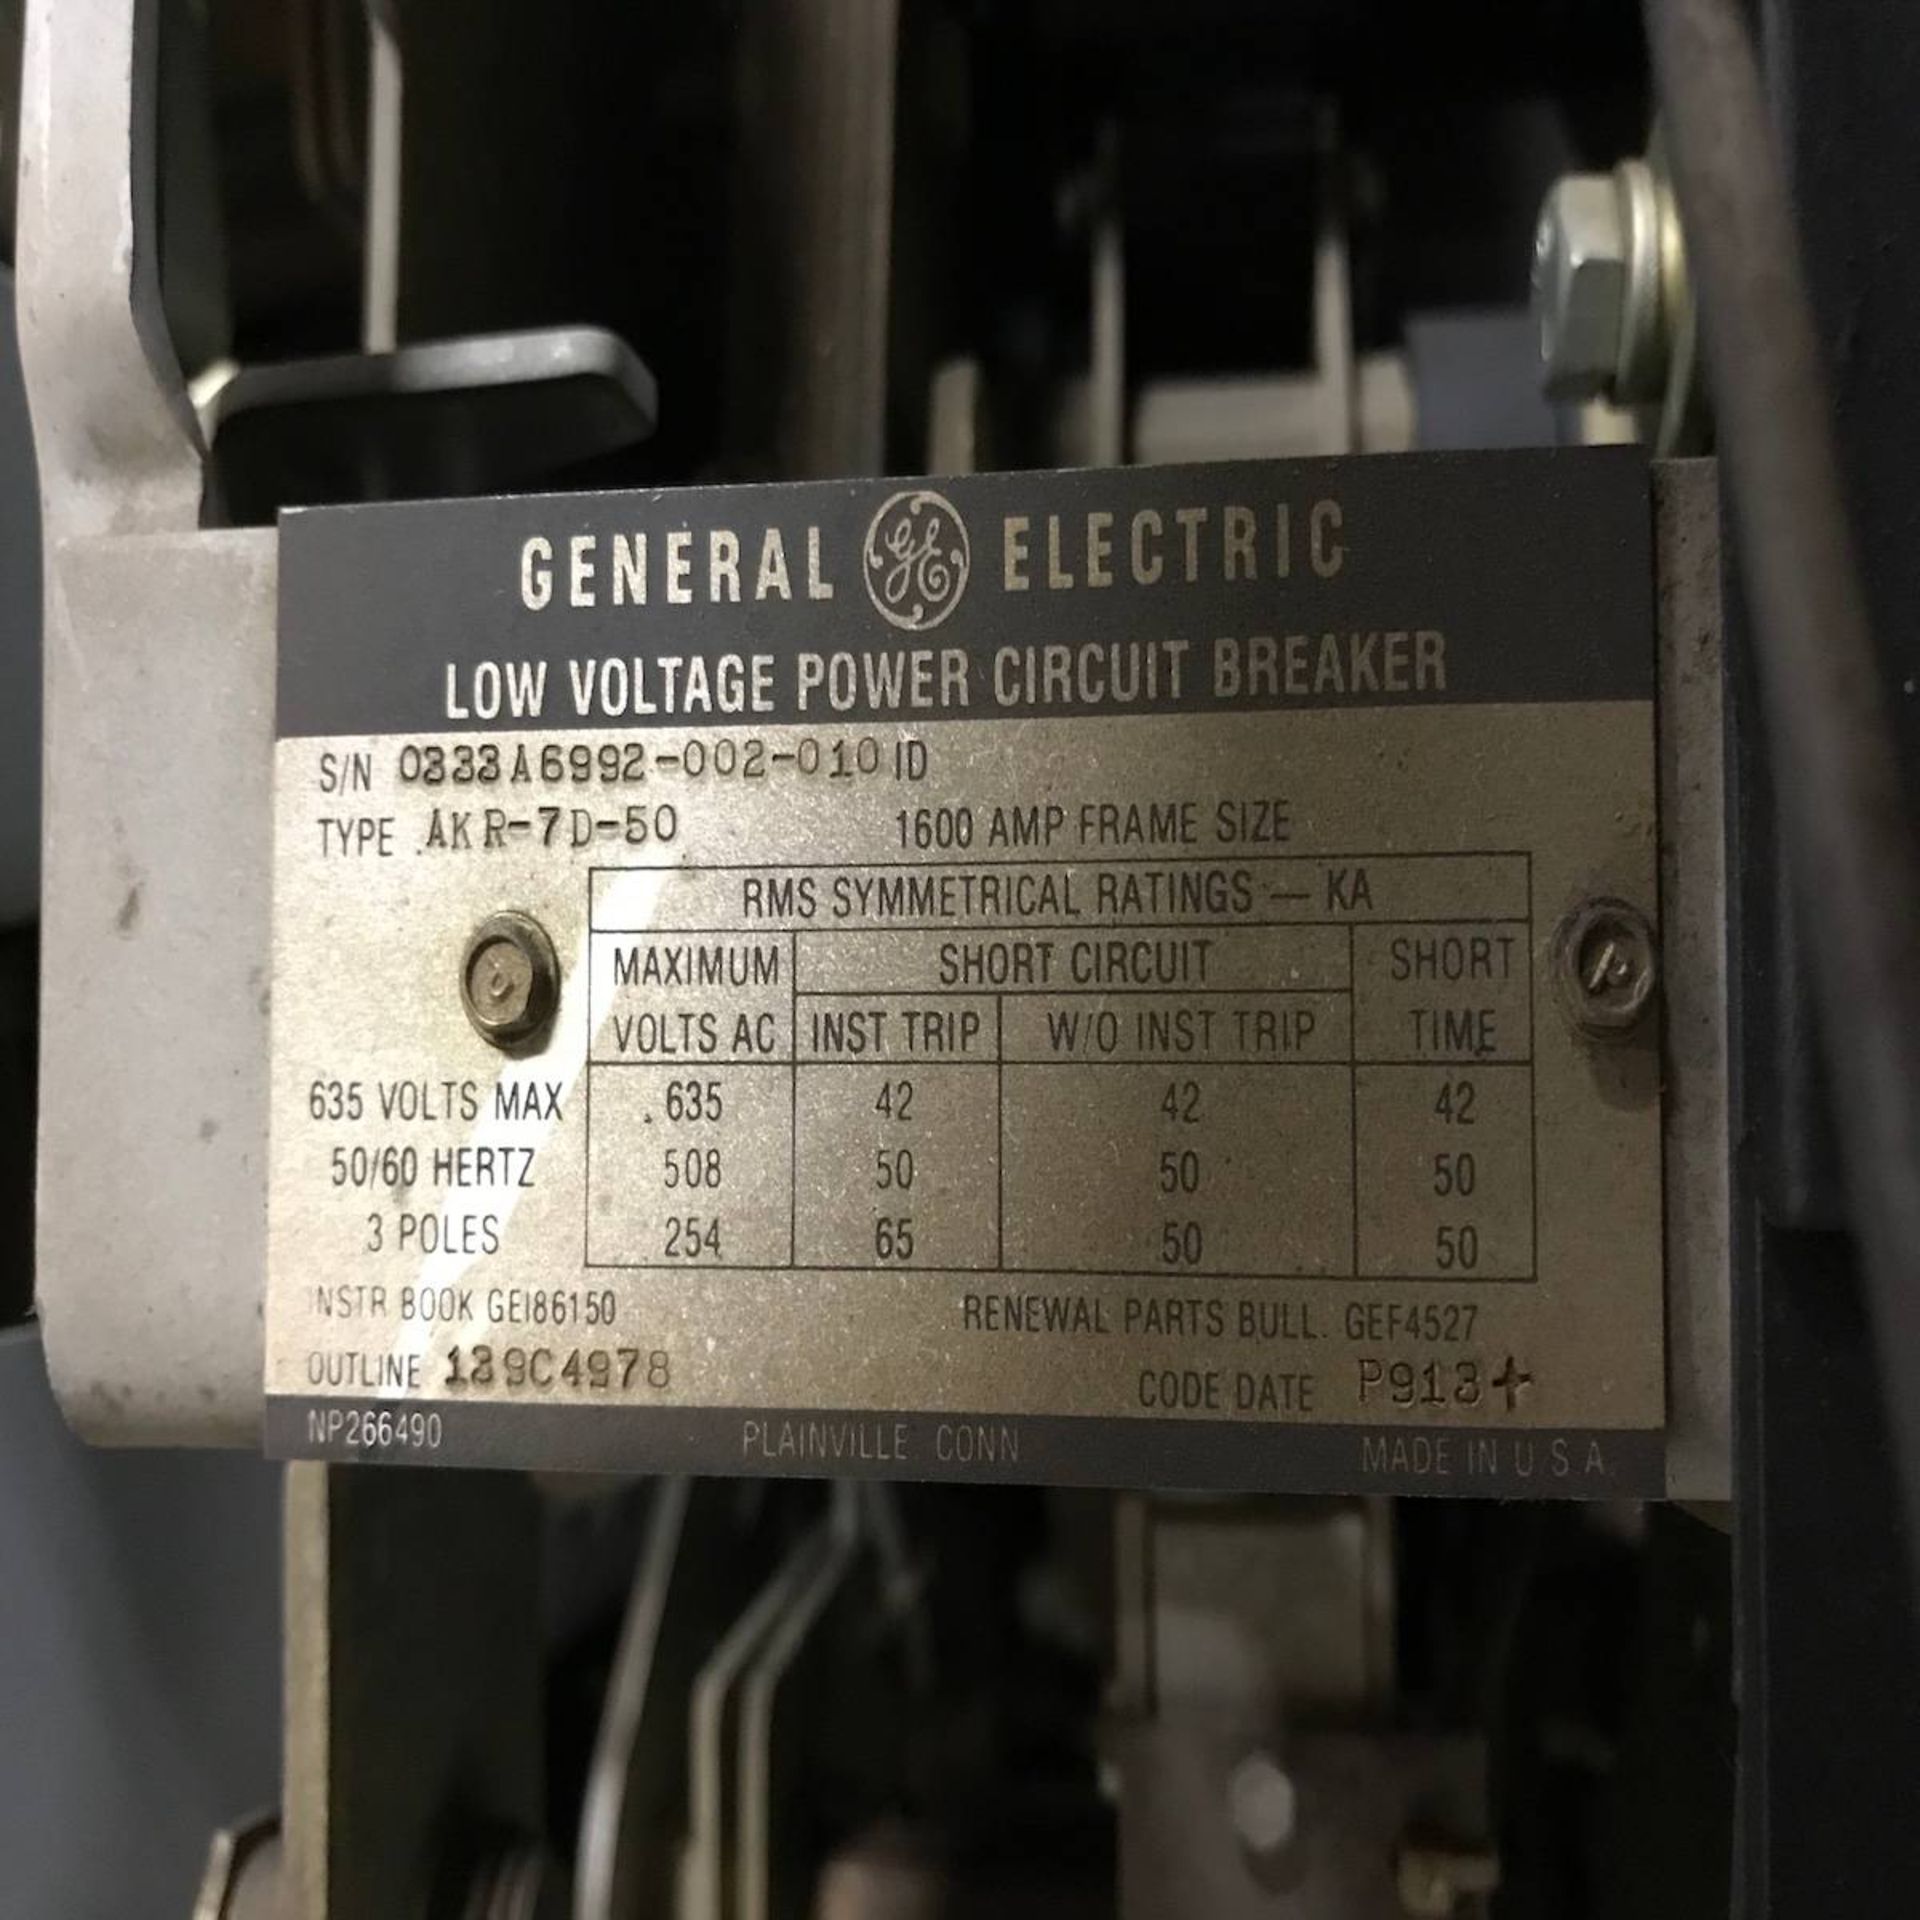 General Electric AKR-7D-75 Low Voltage Power Circuit Breaker - Image 3 of 5